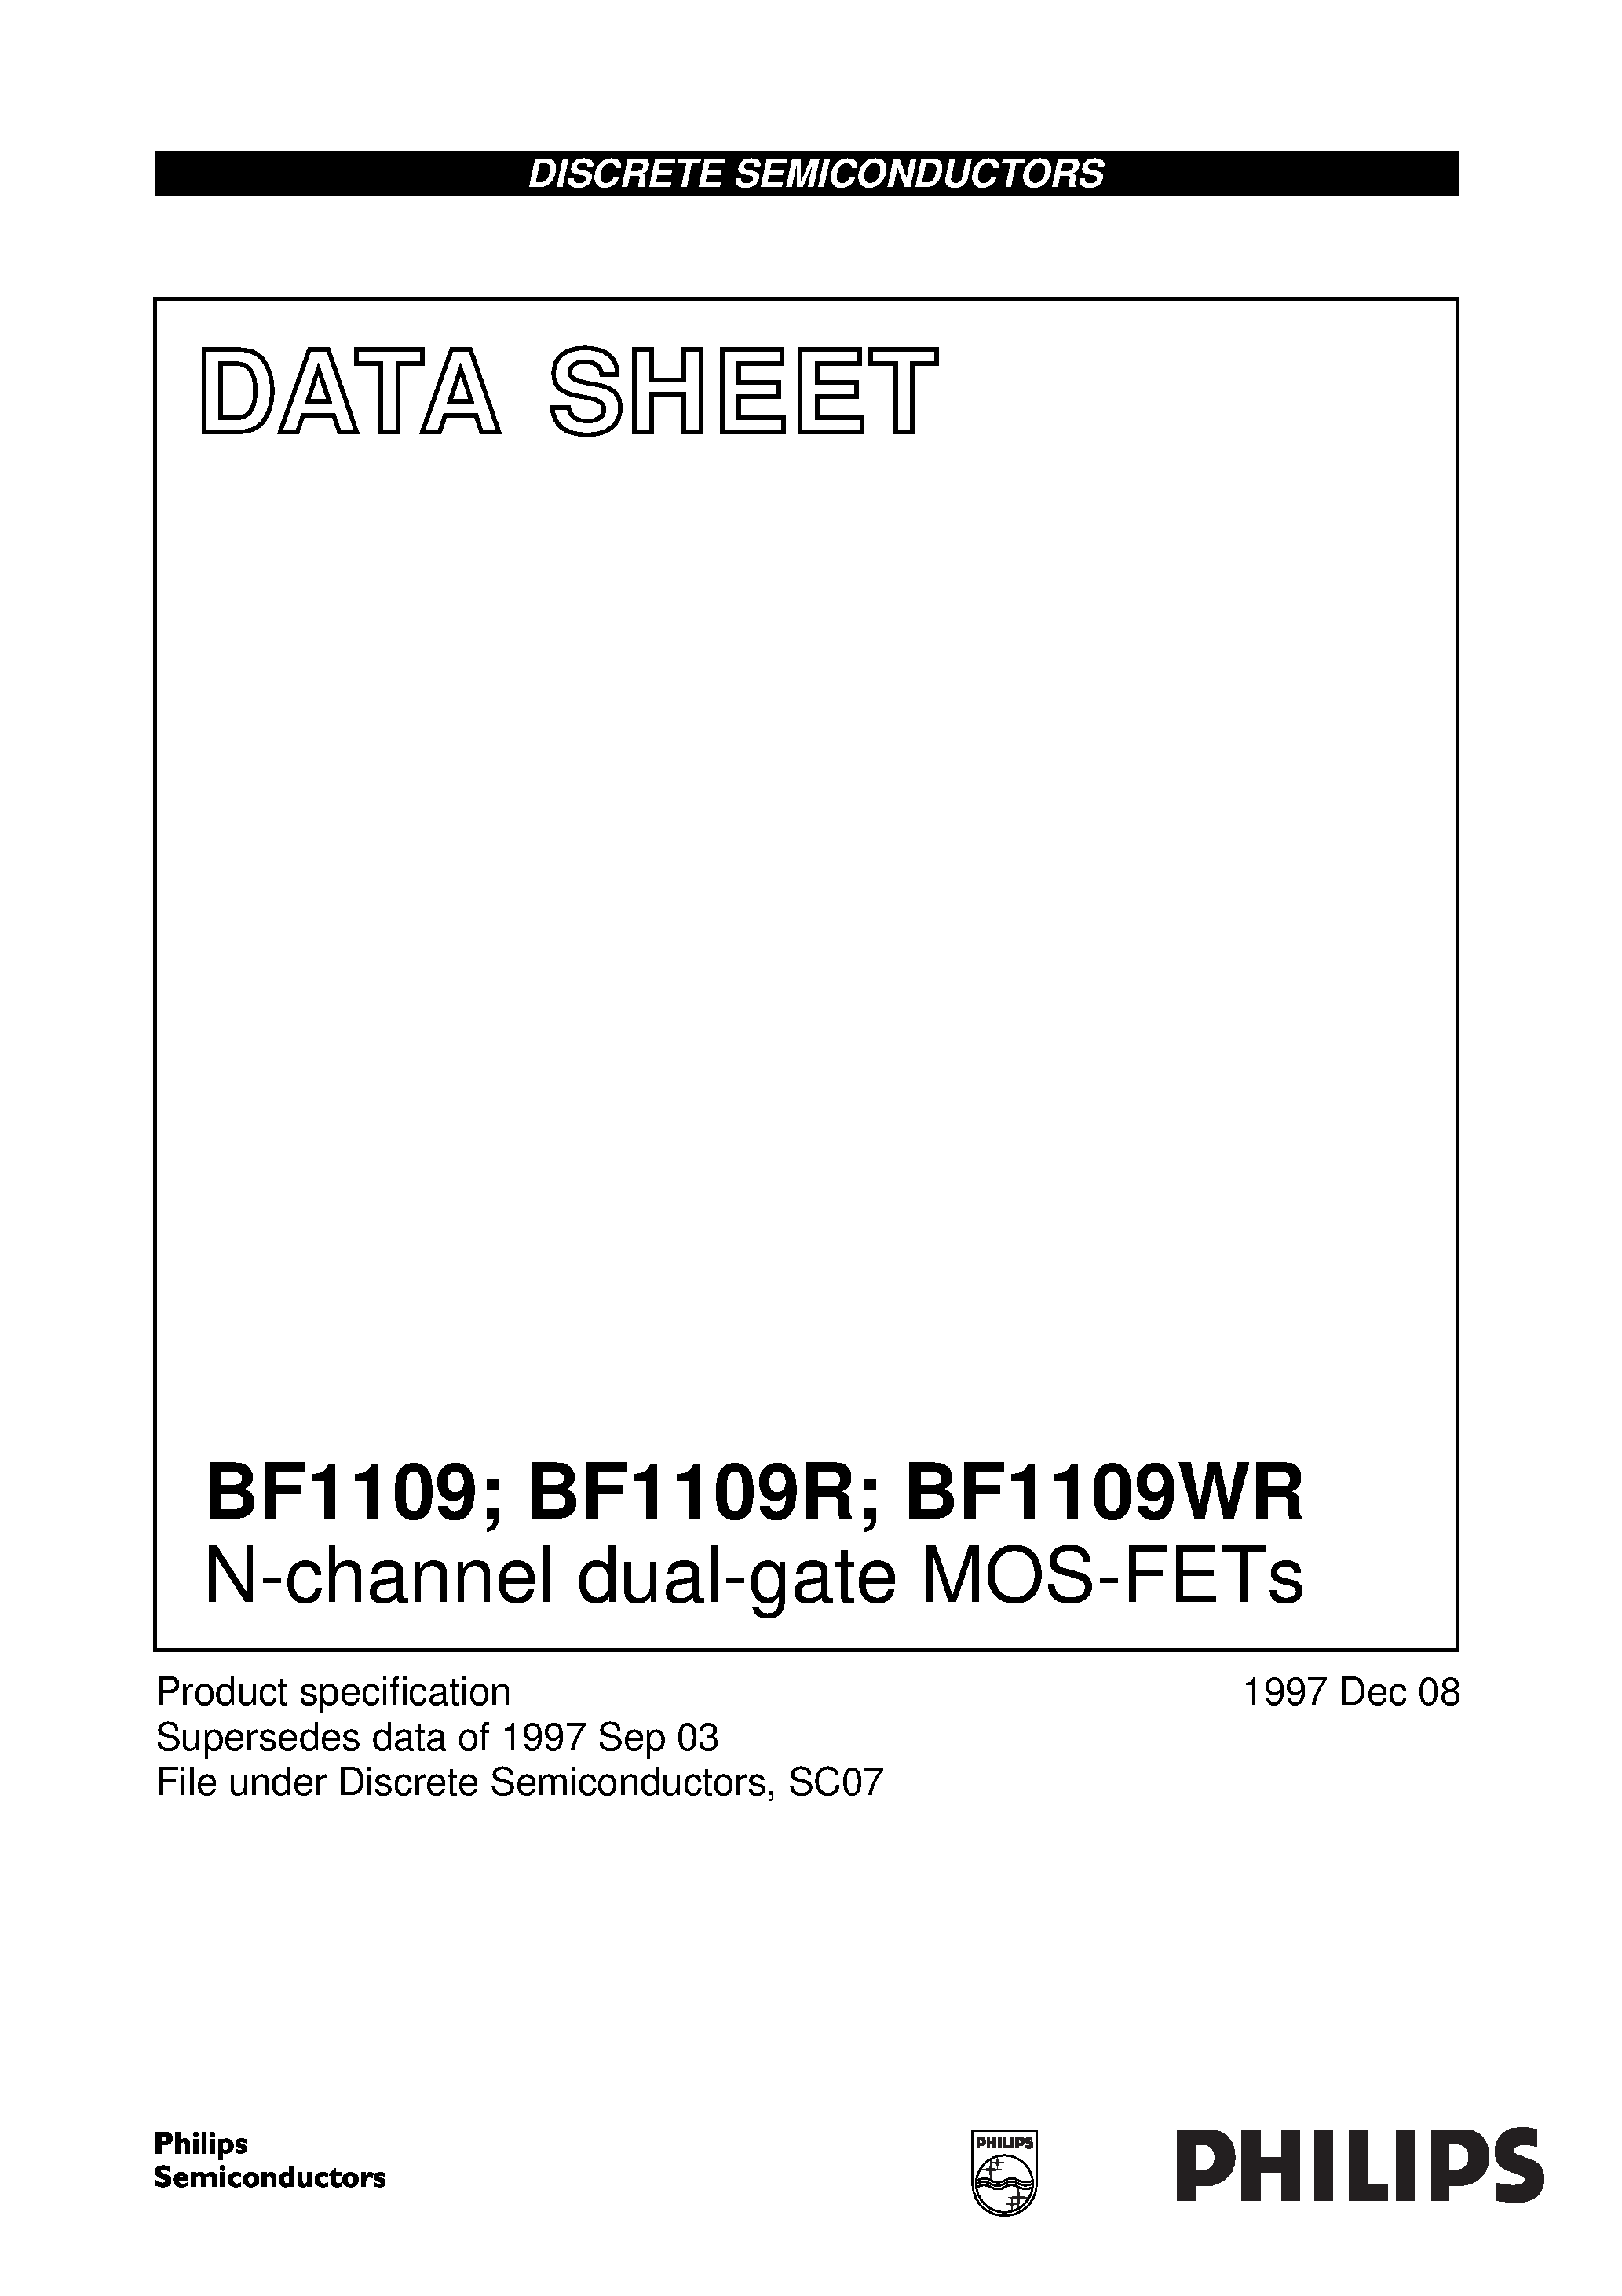 Datasheet BF1109 - N-channel dual-gate MOS-FETs page 1